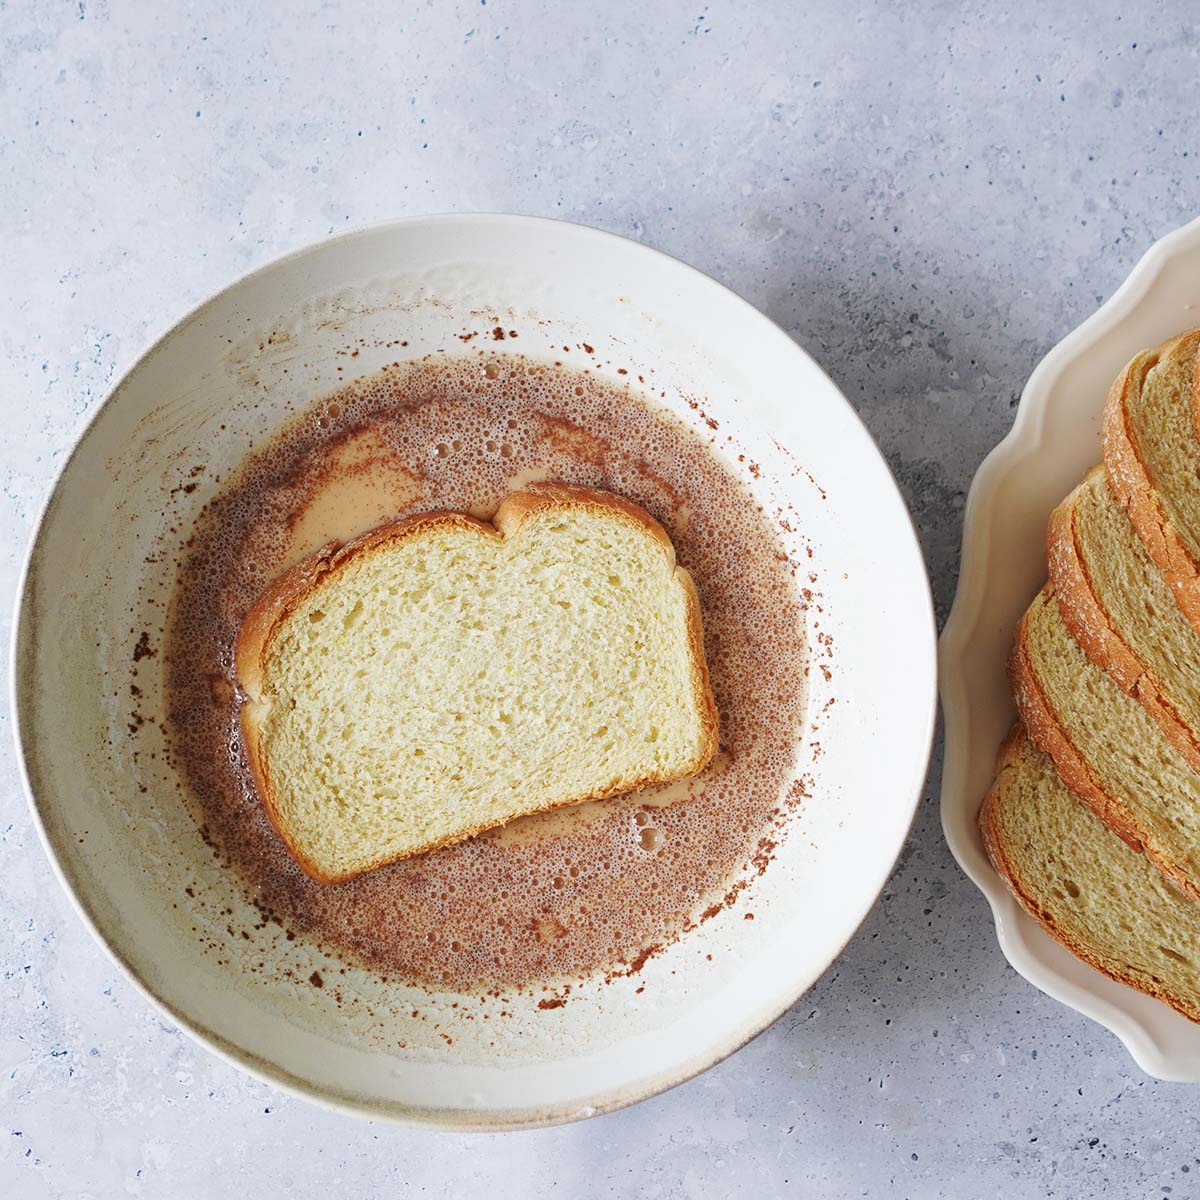 A slice of bread dipped in an egg, milk with cinnamon mixture on a large bowl.